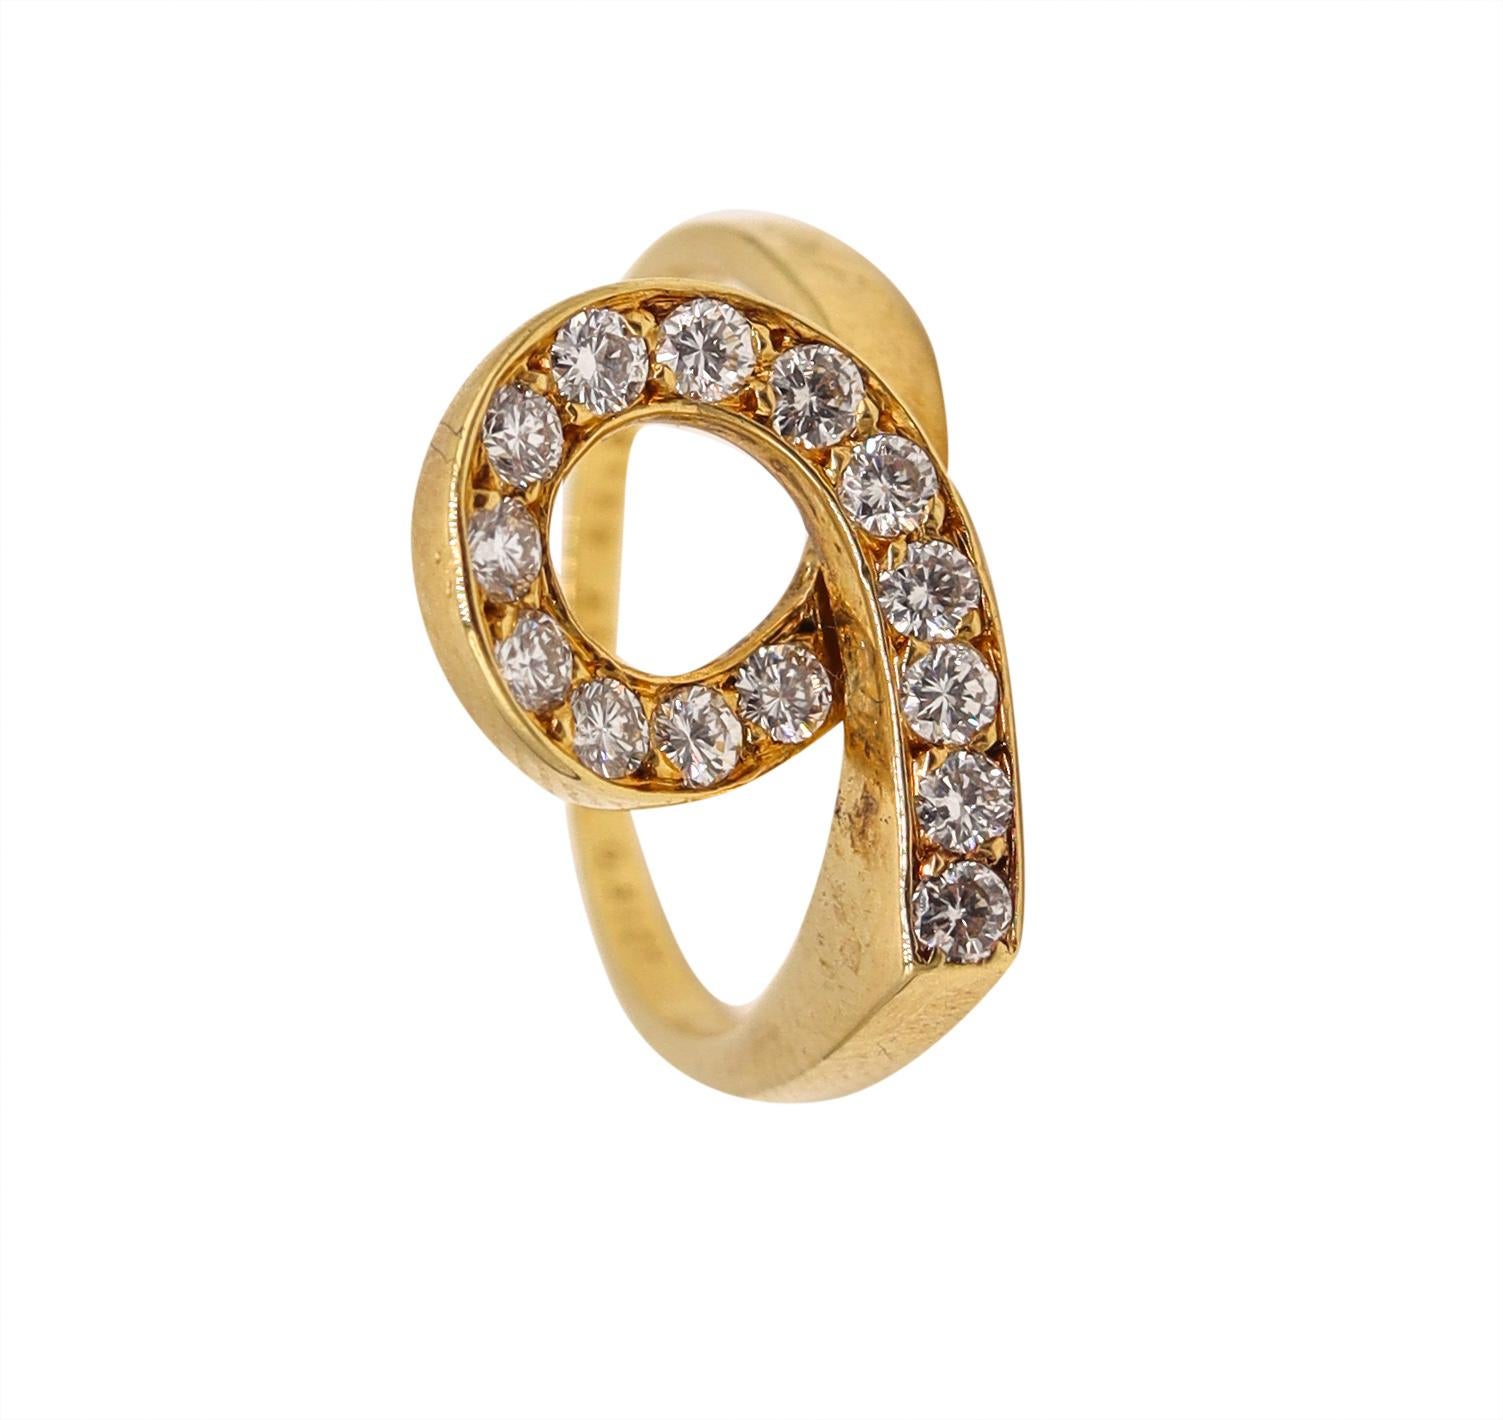 Brilliant Cut Van Cleefs & Arpels Paris Twisted Ring in 18Kt with 0.51 Cts in VVS Diamonds